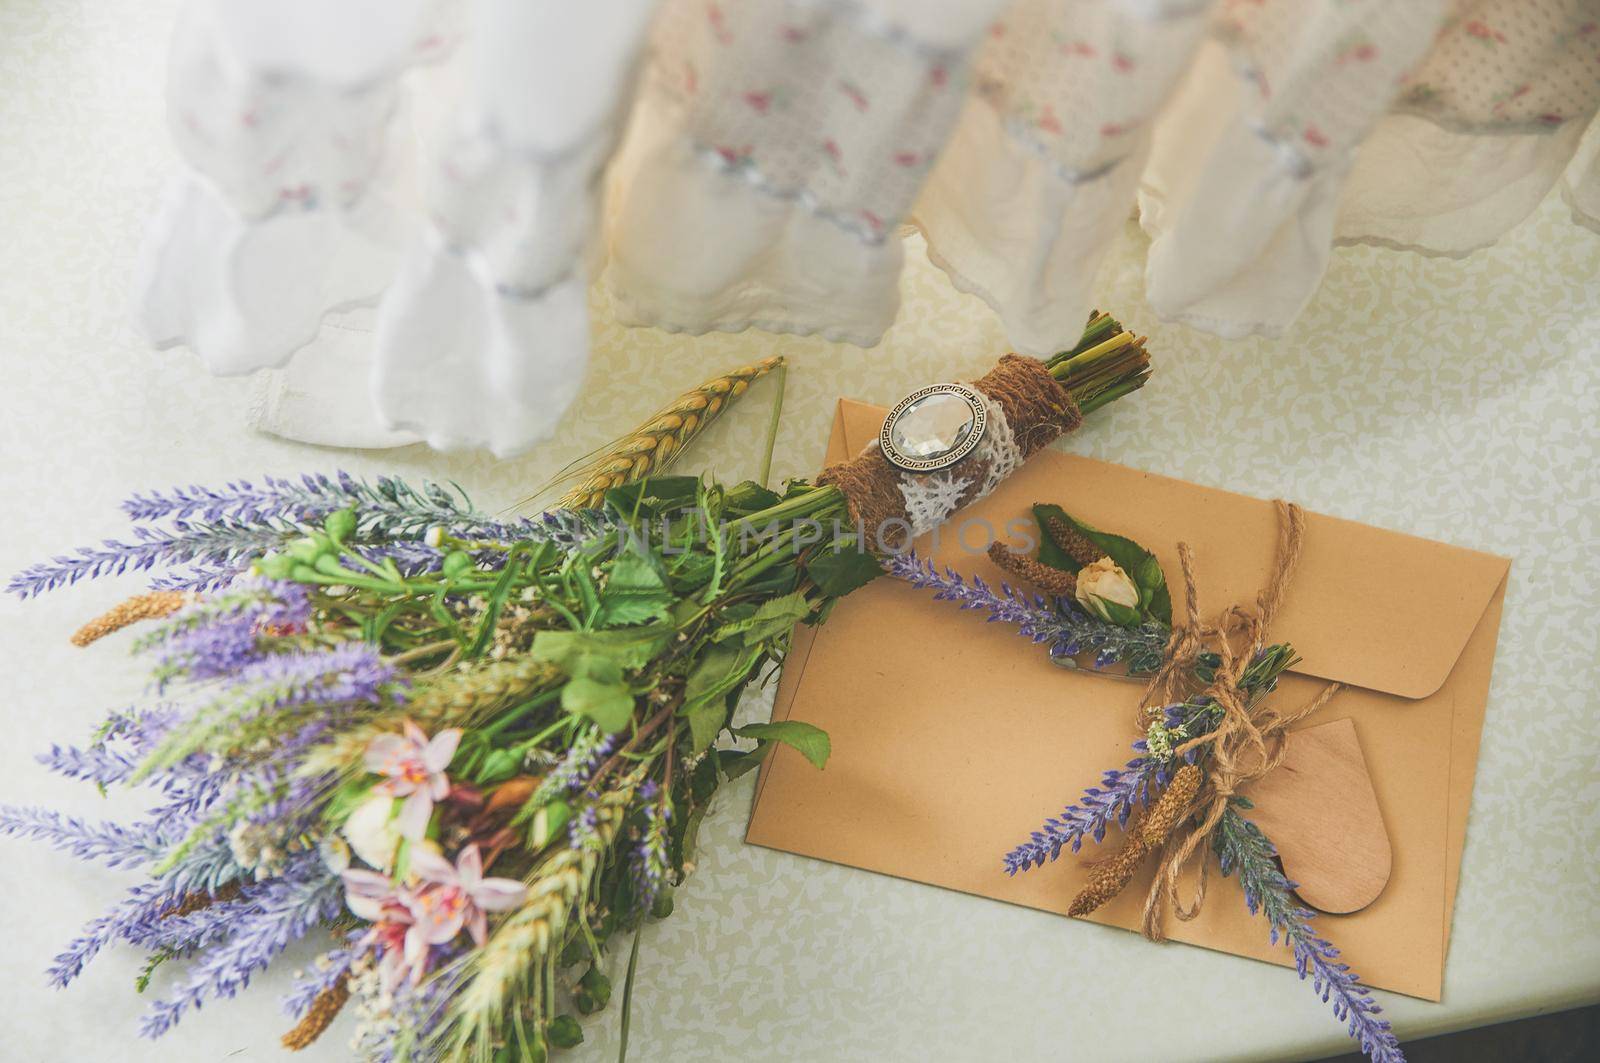 bridal bouquet of lavender in a boho style lies on the window near the handmade envelope, on top of the wedding dress